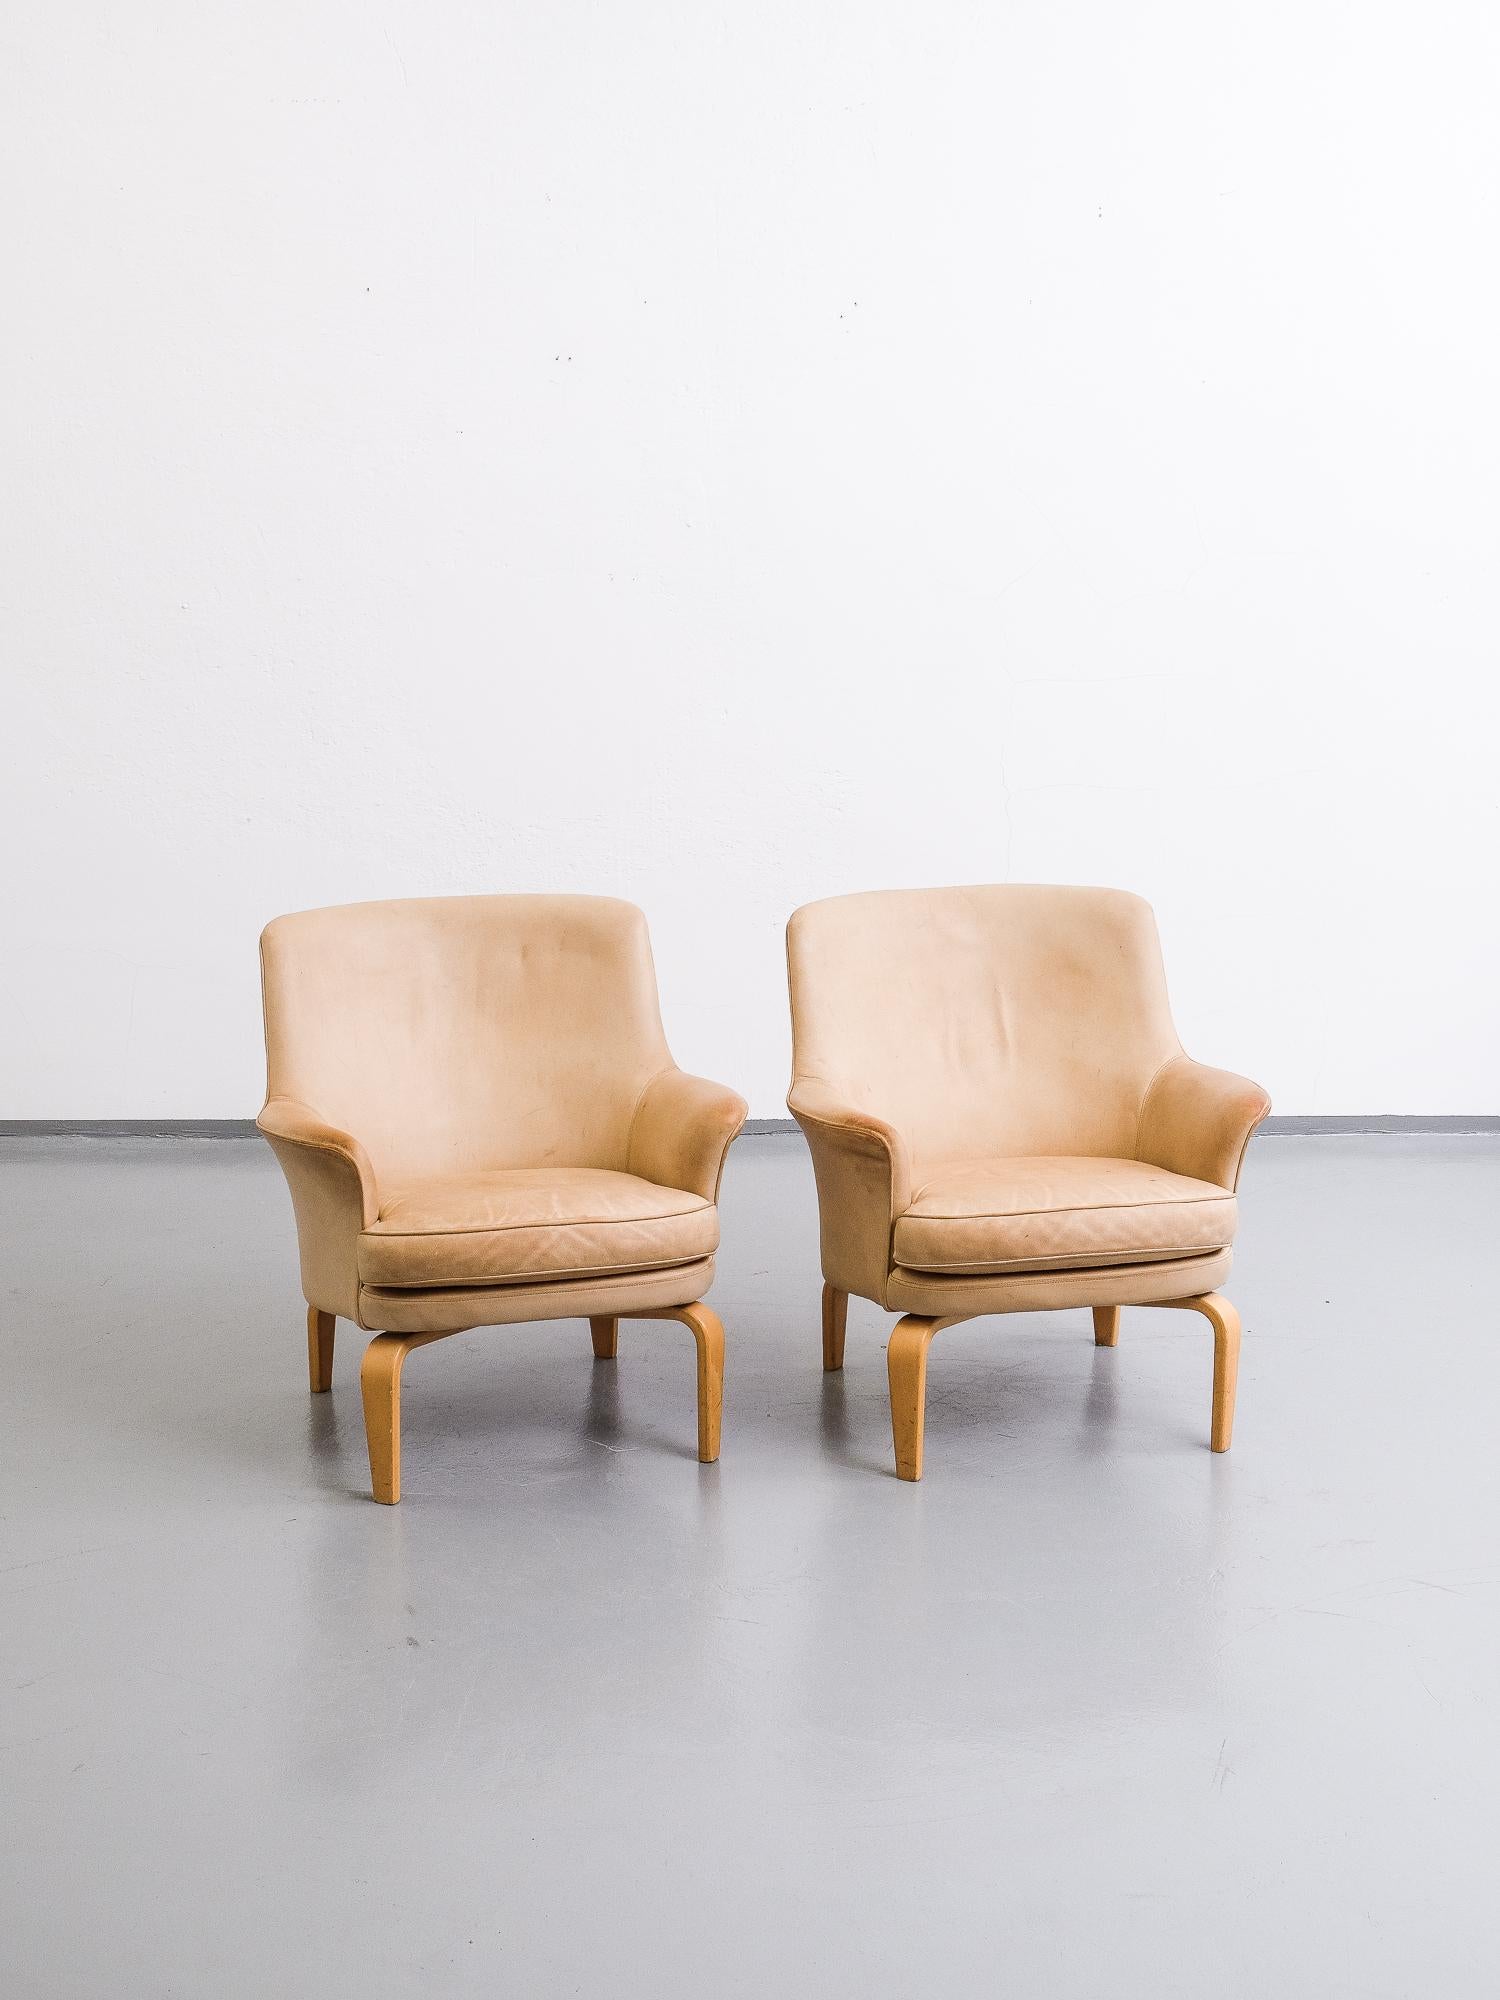 A pair of 'Pilot' lounge chairs in beige leather and on birch feet by Arne Norell for Norell Mobel AB.
Labeled and in good original condition. Patinated leather.